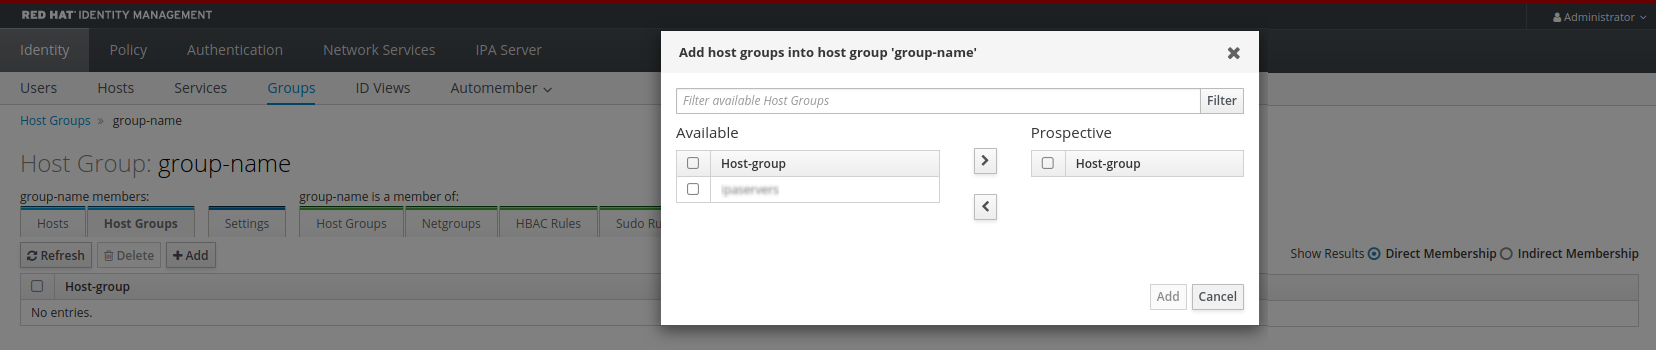 Screenshot of the "Add host groups into host group group-name" pop-up window which lets you select from "Available host groups" on the left to add to a "Prospective" list on the right. There is an "Add" button at the bottom-right of the window.